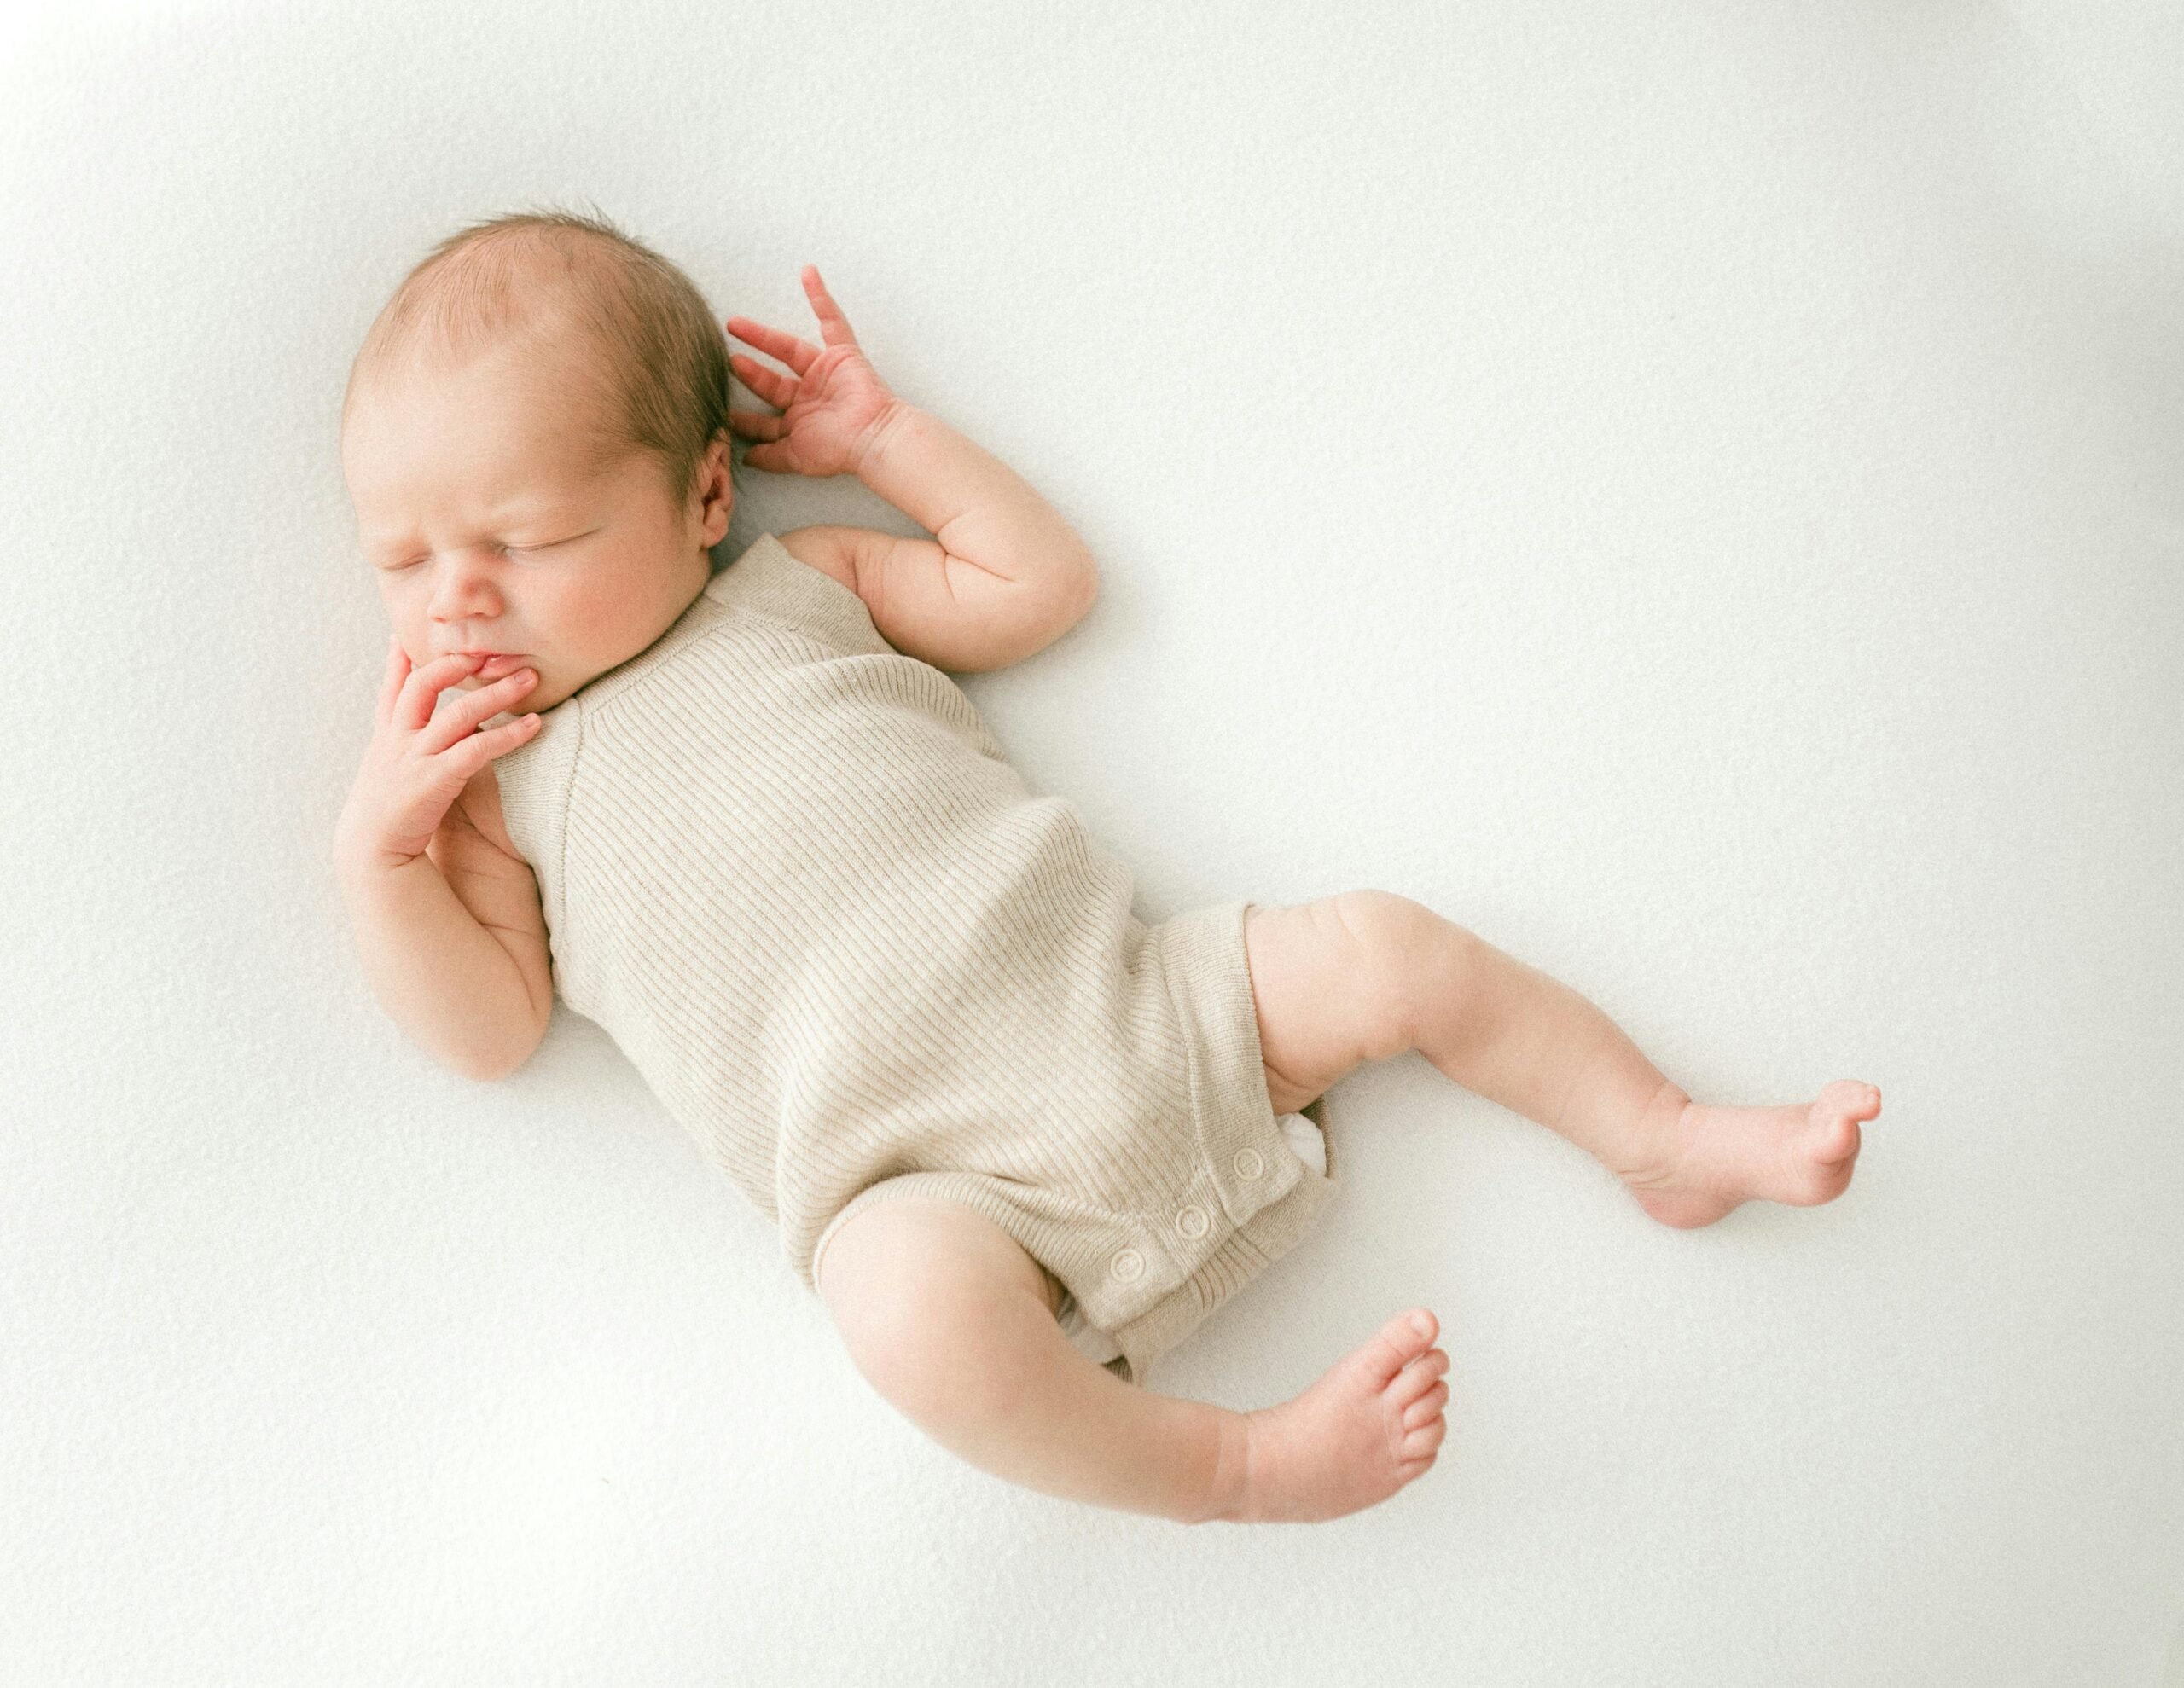 How Many Hours Does a Newborn Sleep? What You Need to Know For Optimizing Their Sleep